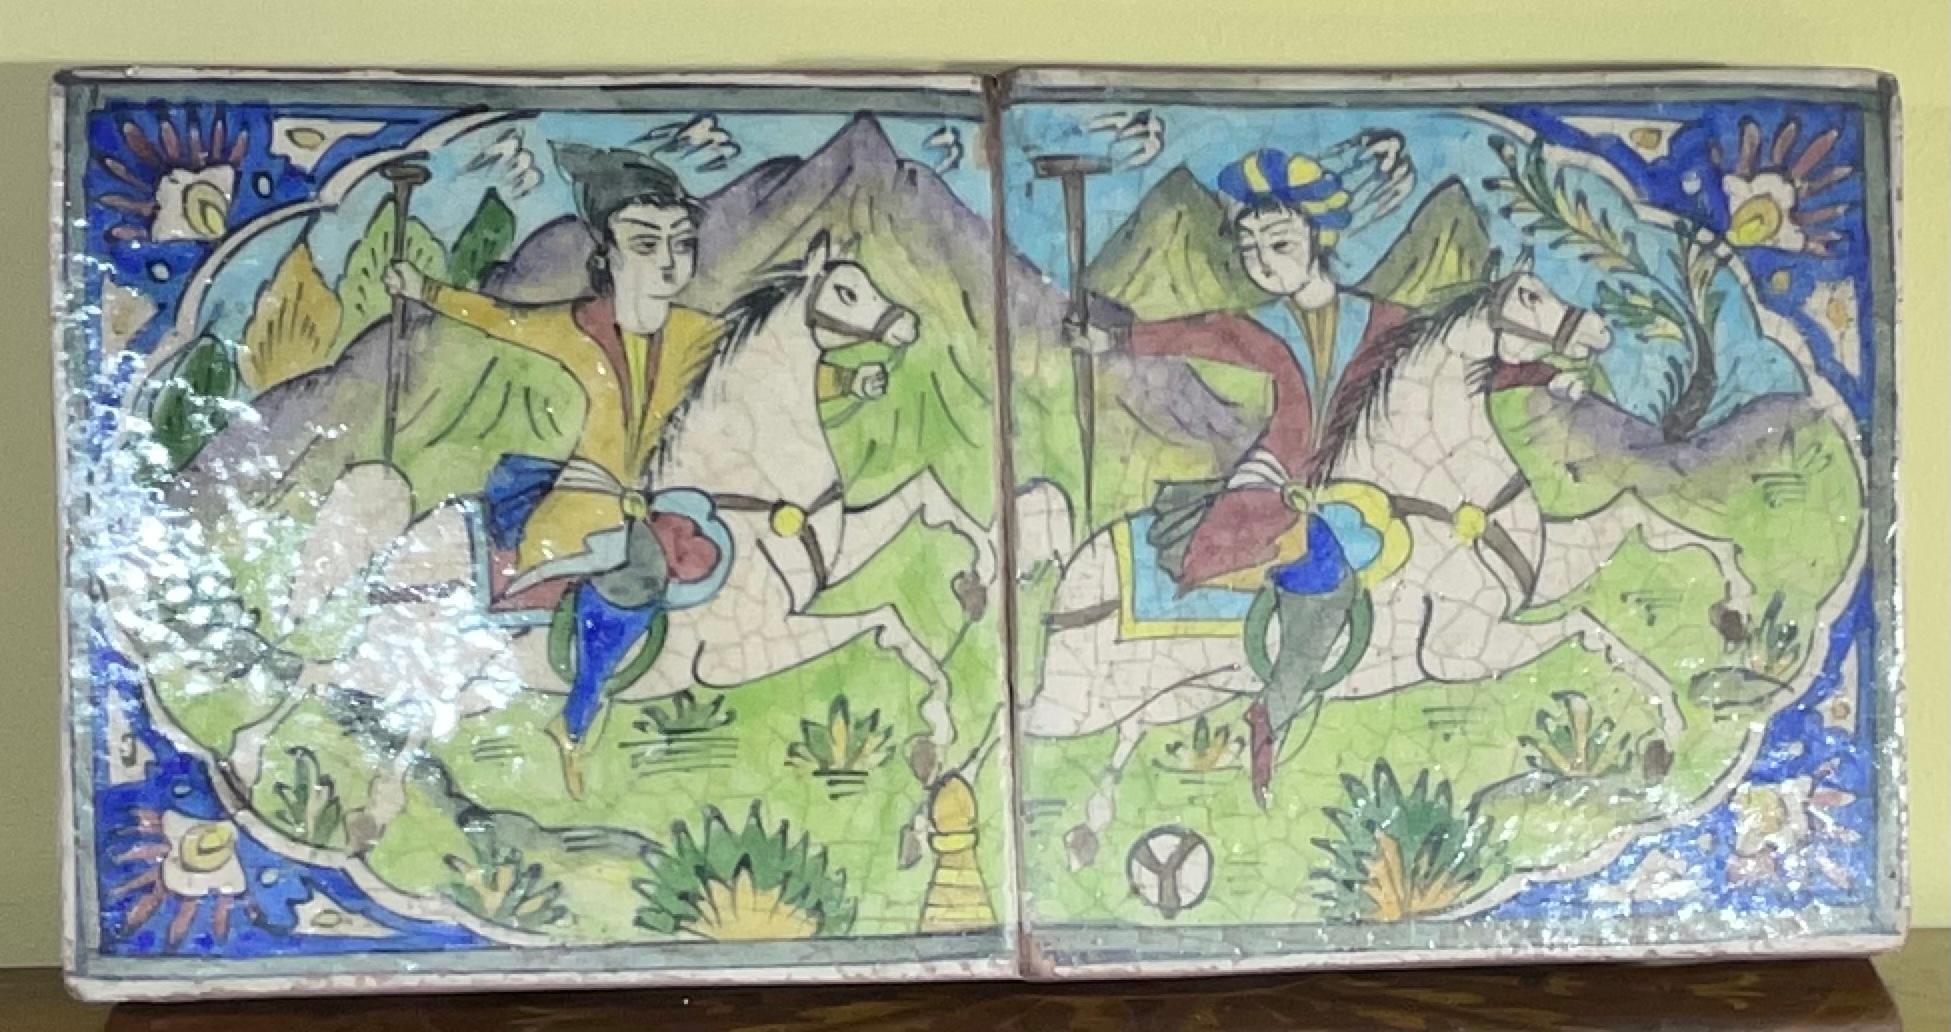 Vintage Polo Players Ceramic Persian Tile Wall Hanging 4